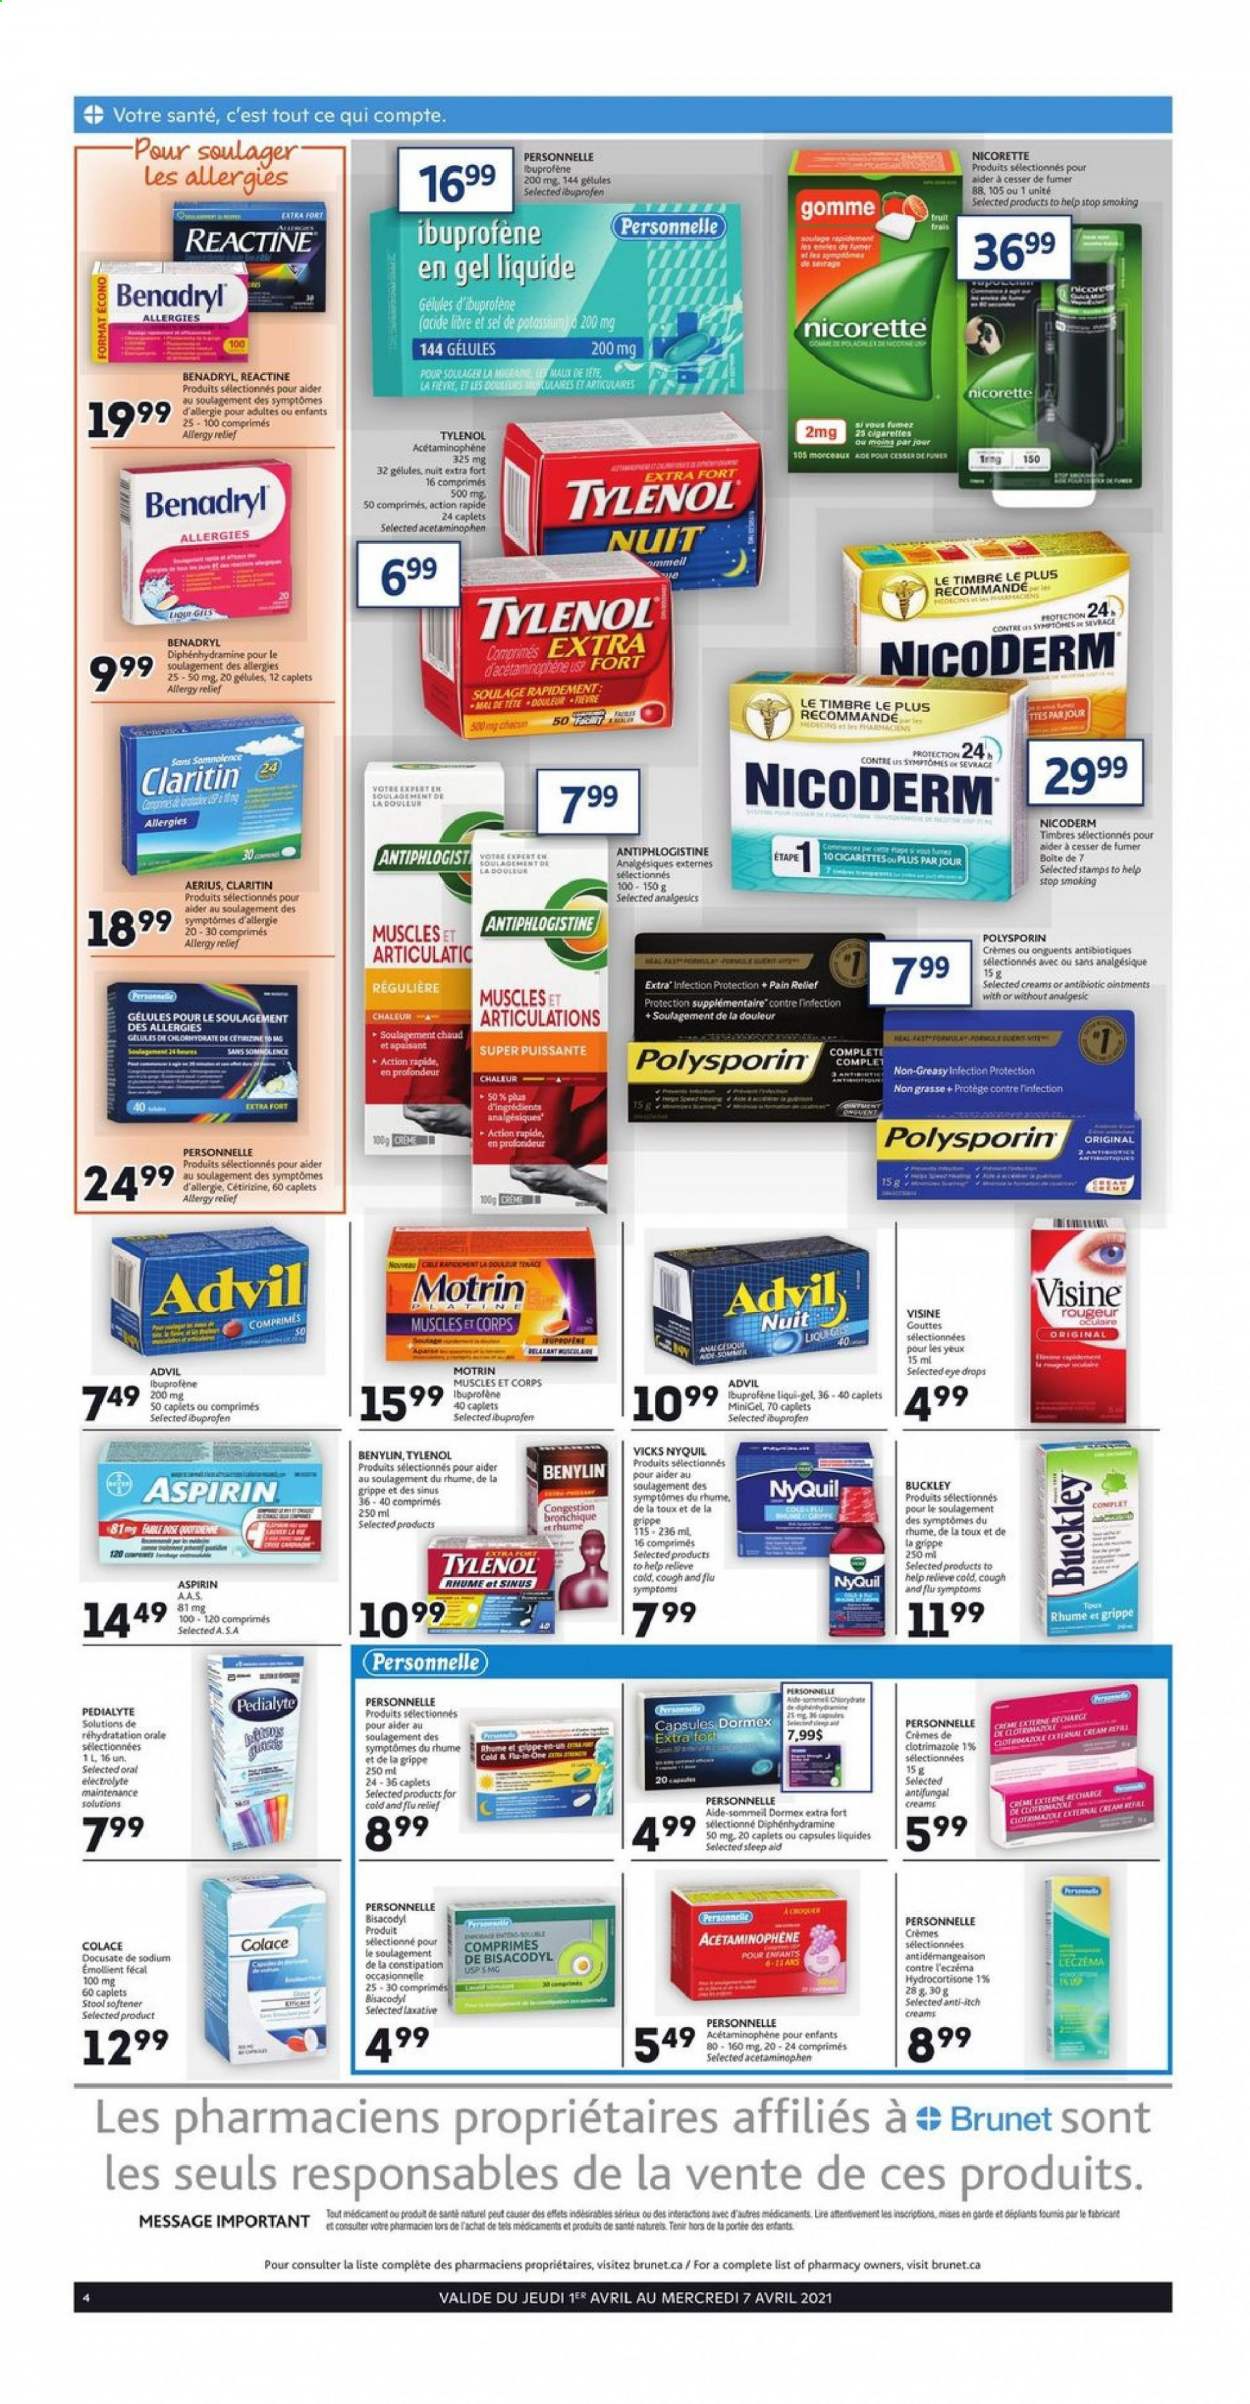 thumbnail - Brunet Flyer - April 01, 2021 - April 07, 2021 - Sales products - fabric softener, Vicks, pain relief, NicoDerm, Nicorette, Tylenol, Ibuprofen, NyQuil, eye drops, Advil Rapid, laxative, aspirin, Benylin, allergy relief, Motrin. Page 2.